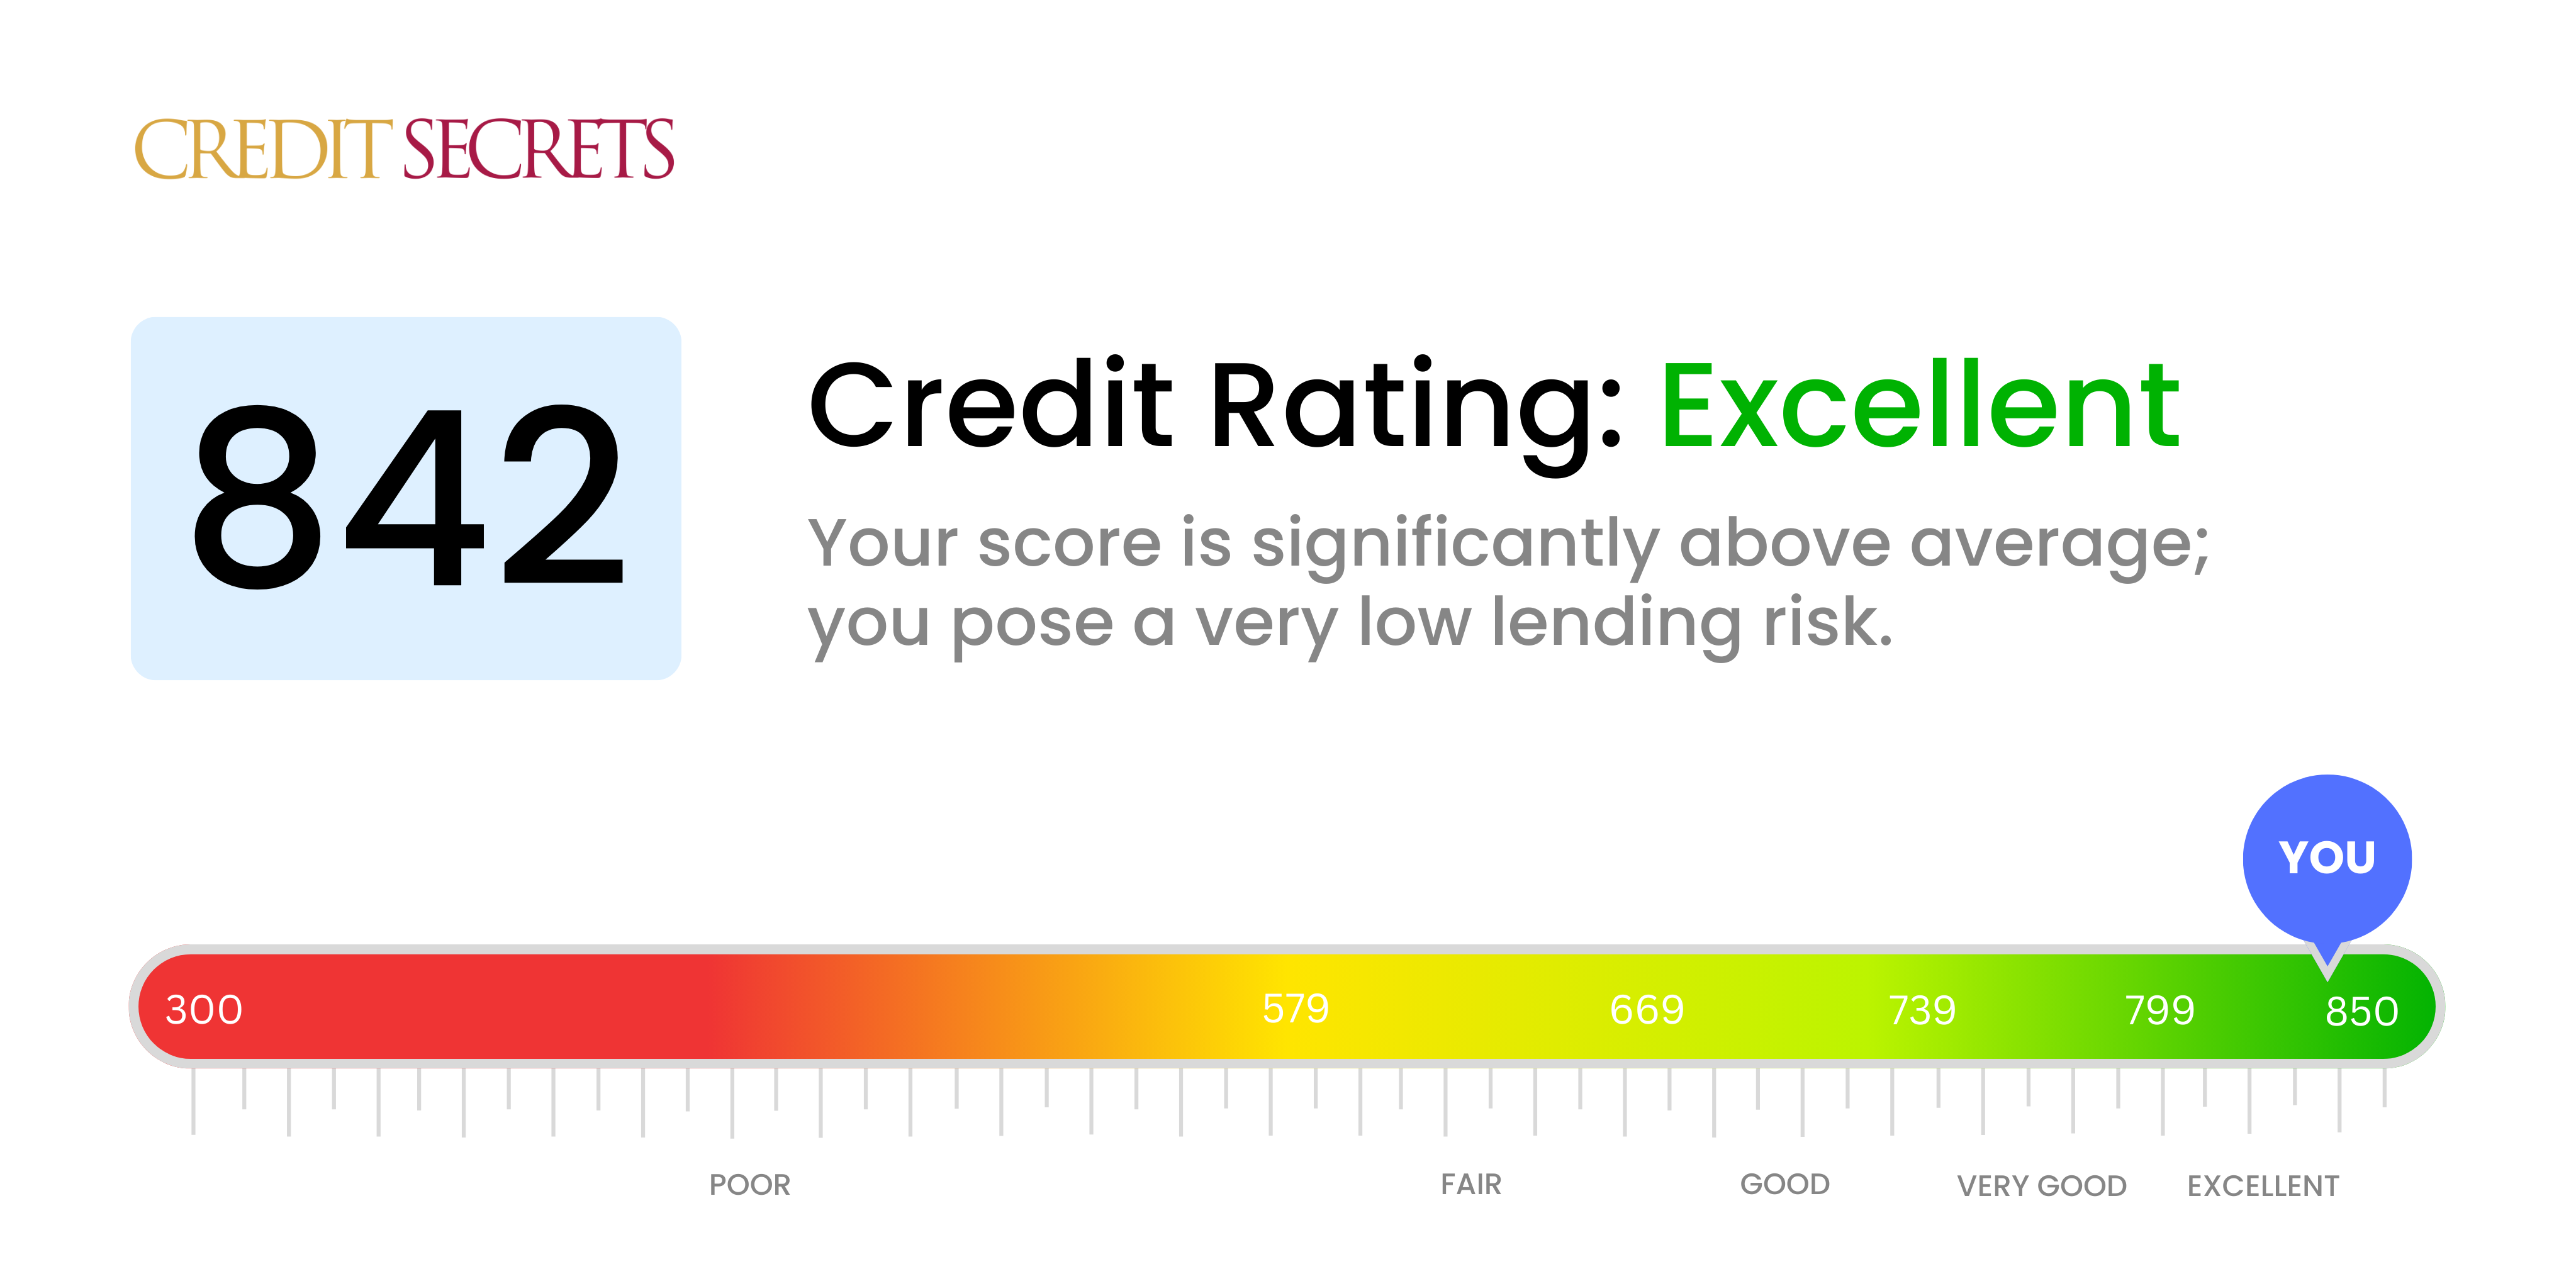 Is 842 a good credit score?